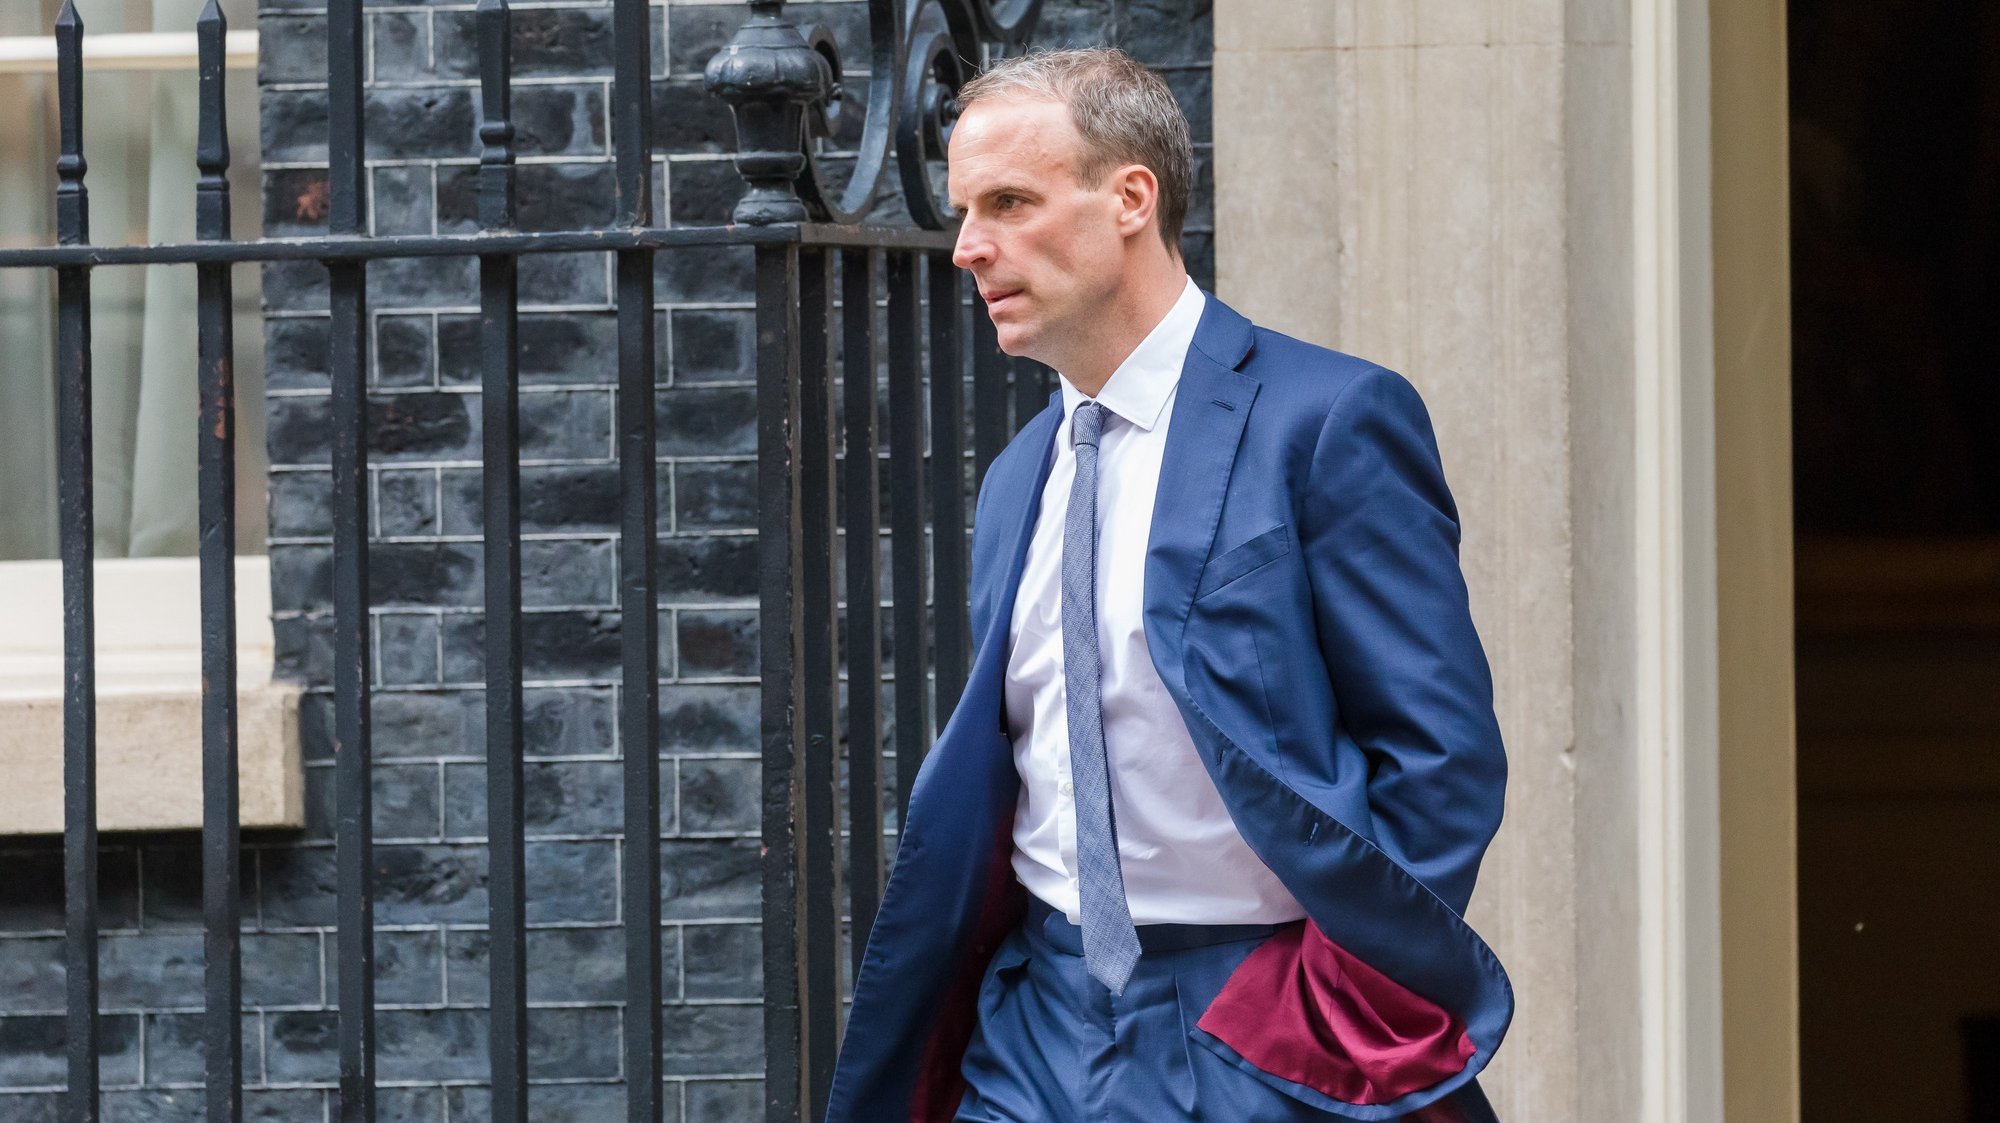 epa09231534 British Foreign Secretary Dominic Raab leaving 10 Downing Street in London, Britain, 27 May 2021. Prime Minister Johnson has rejected claims by his former closest adviser Dominic Cummings that government mistakes led to thousands of extra Covid deaths.  EPA/VICKIE FLORES